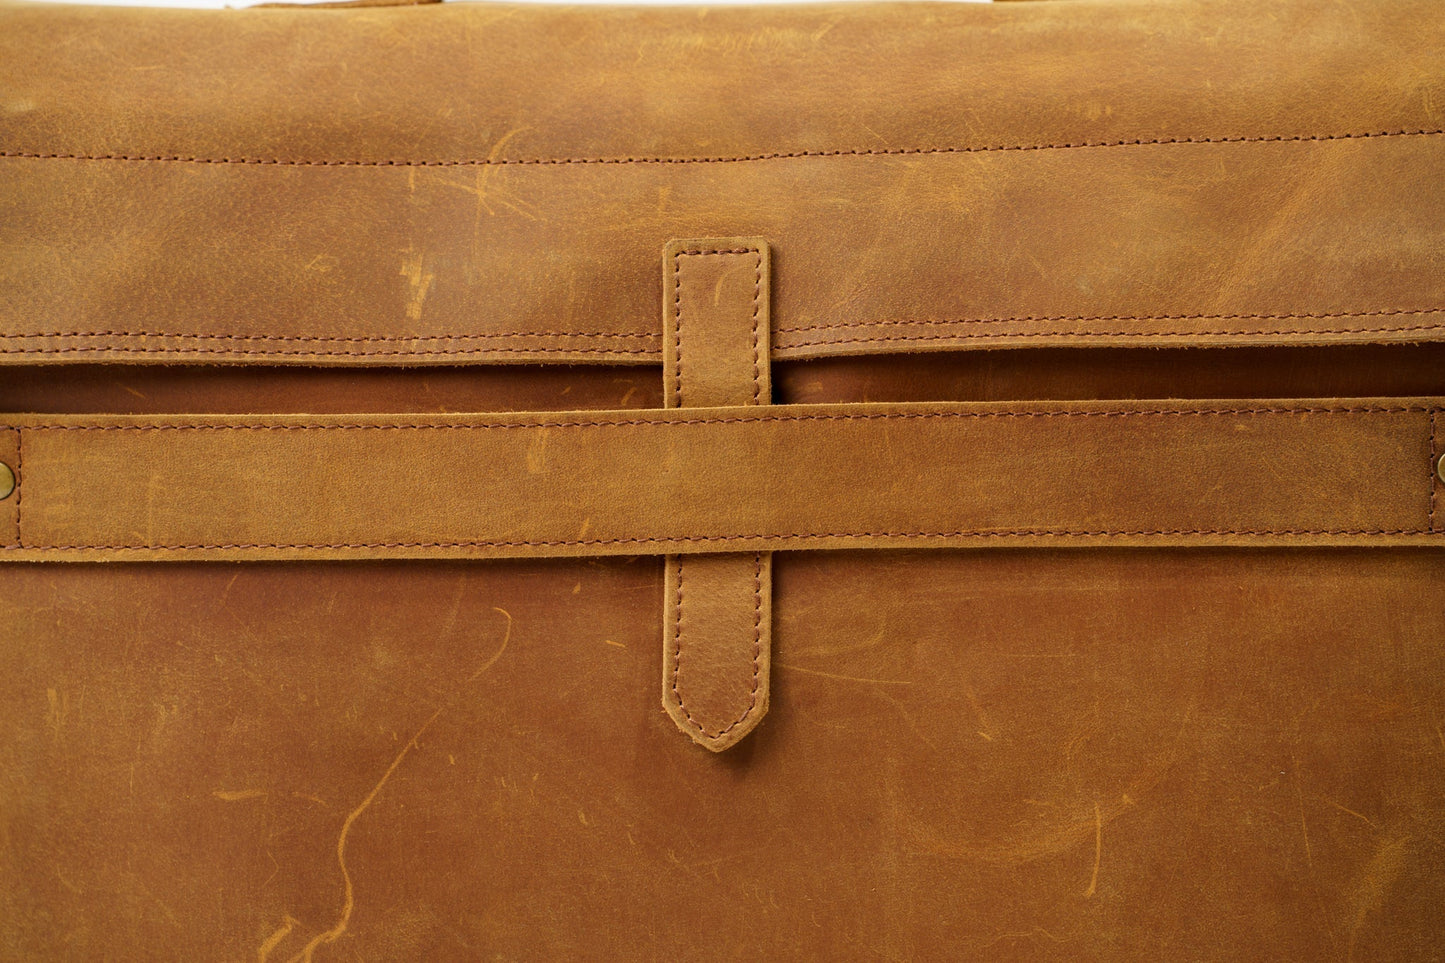 Leather Laptop Briefcase Bag Brown